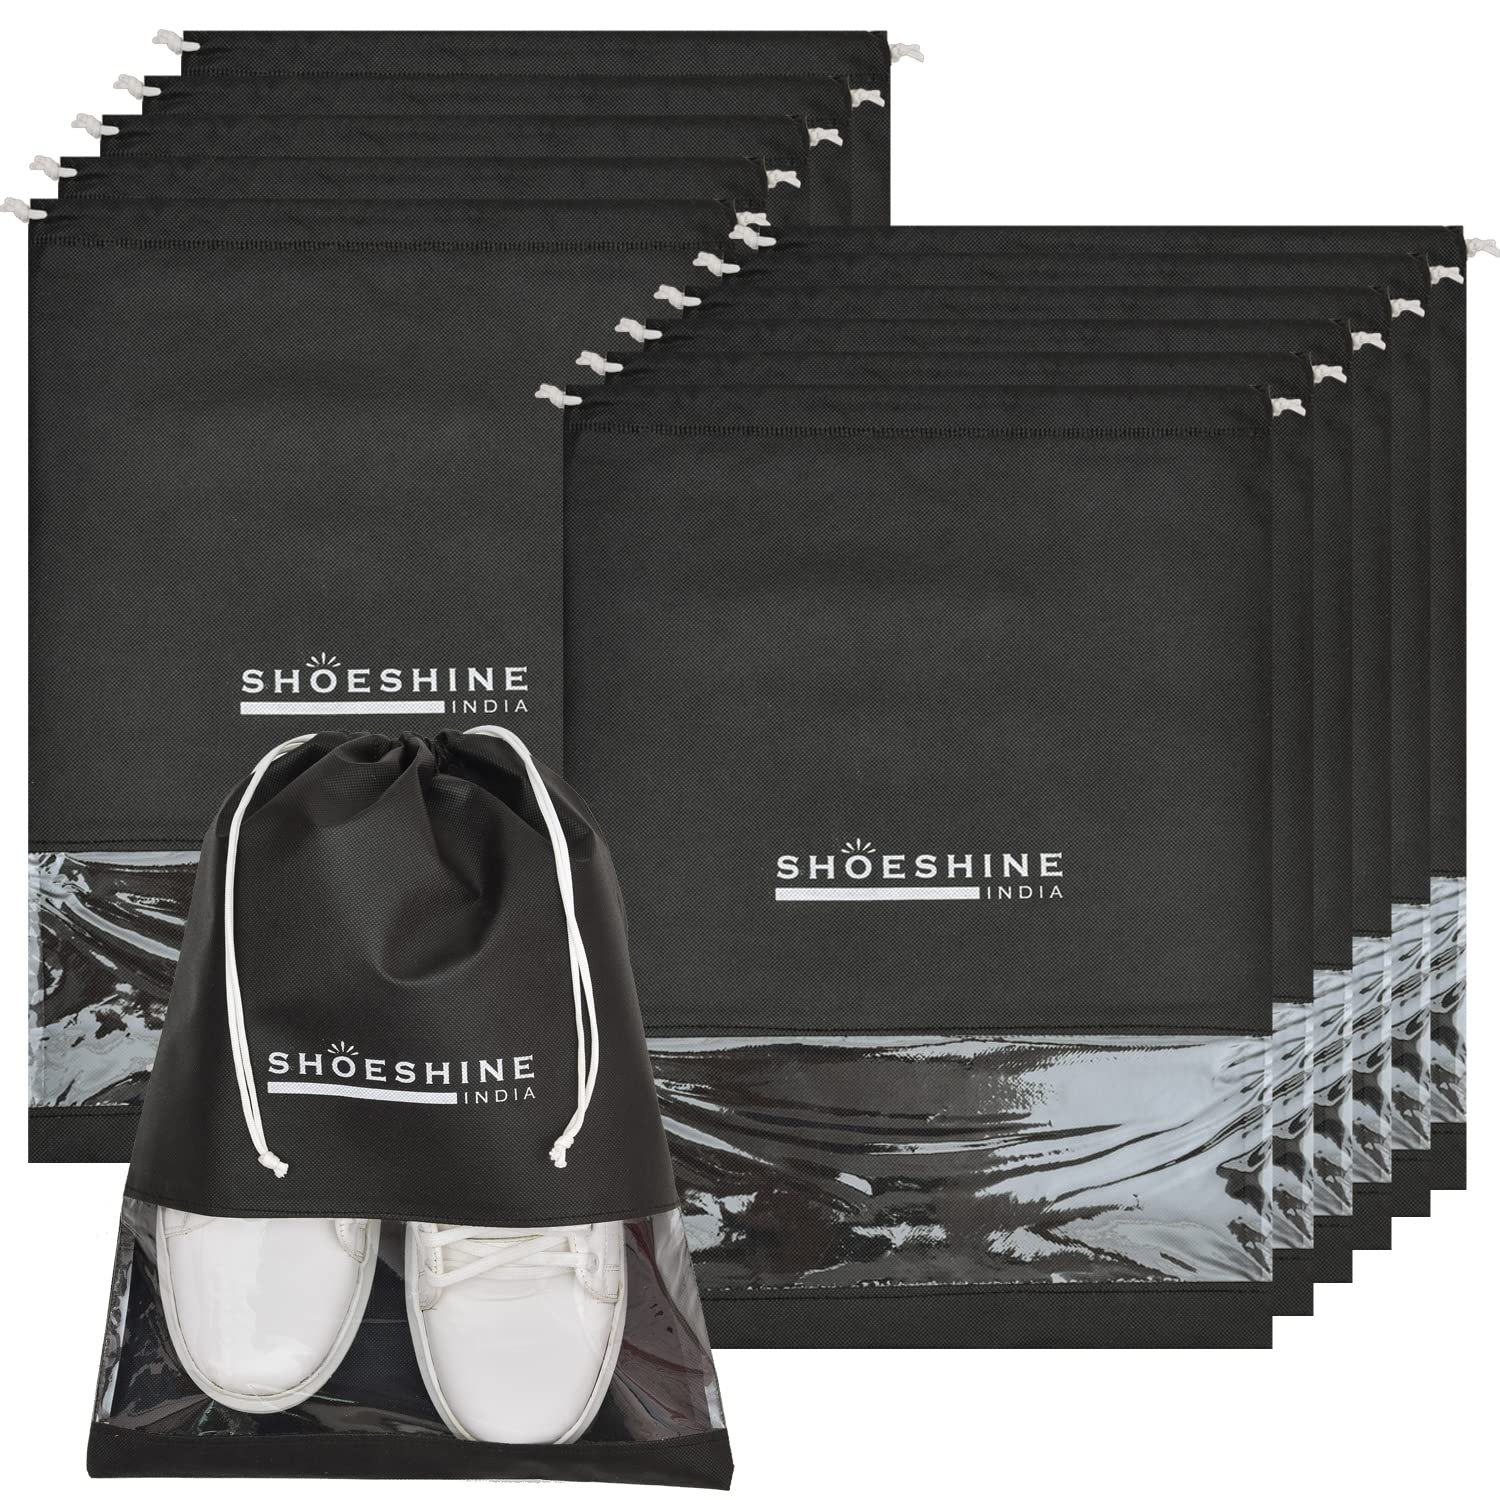 SHOESHINE Shoe Bag for Storage Shoes for Men and Women Travel Essentials